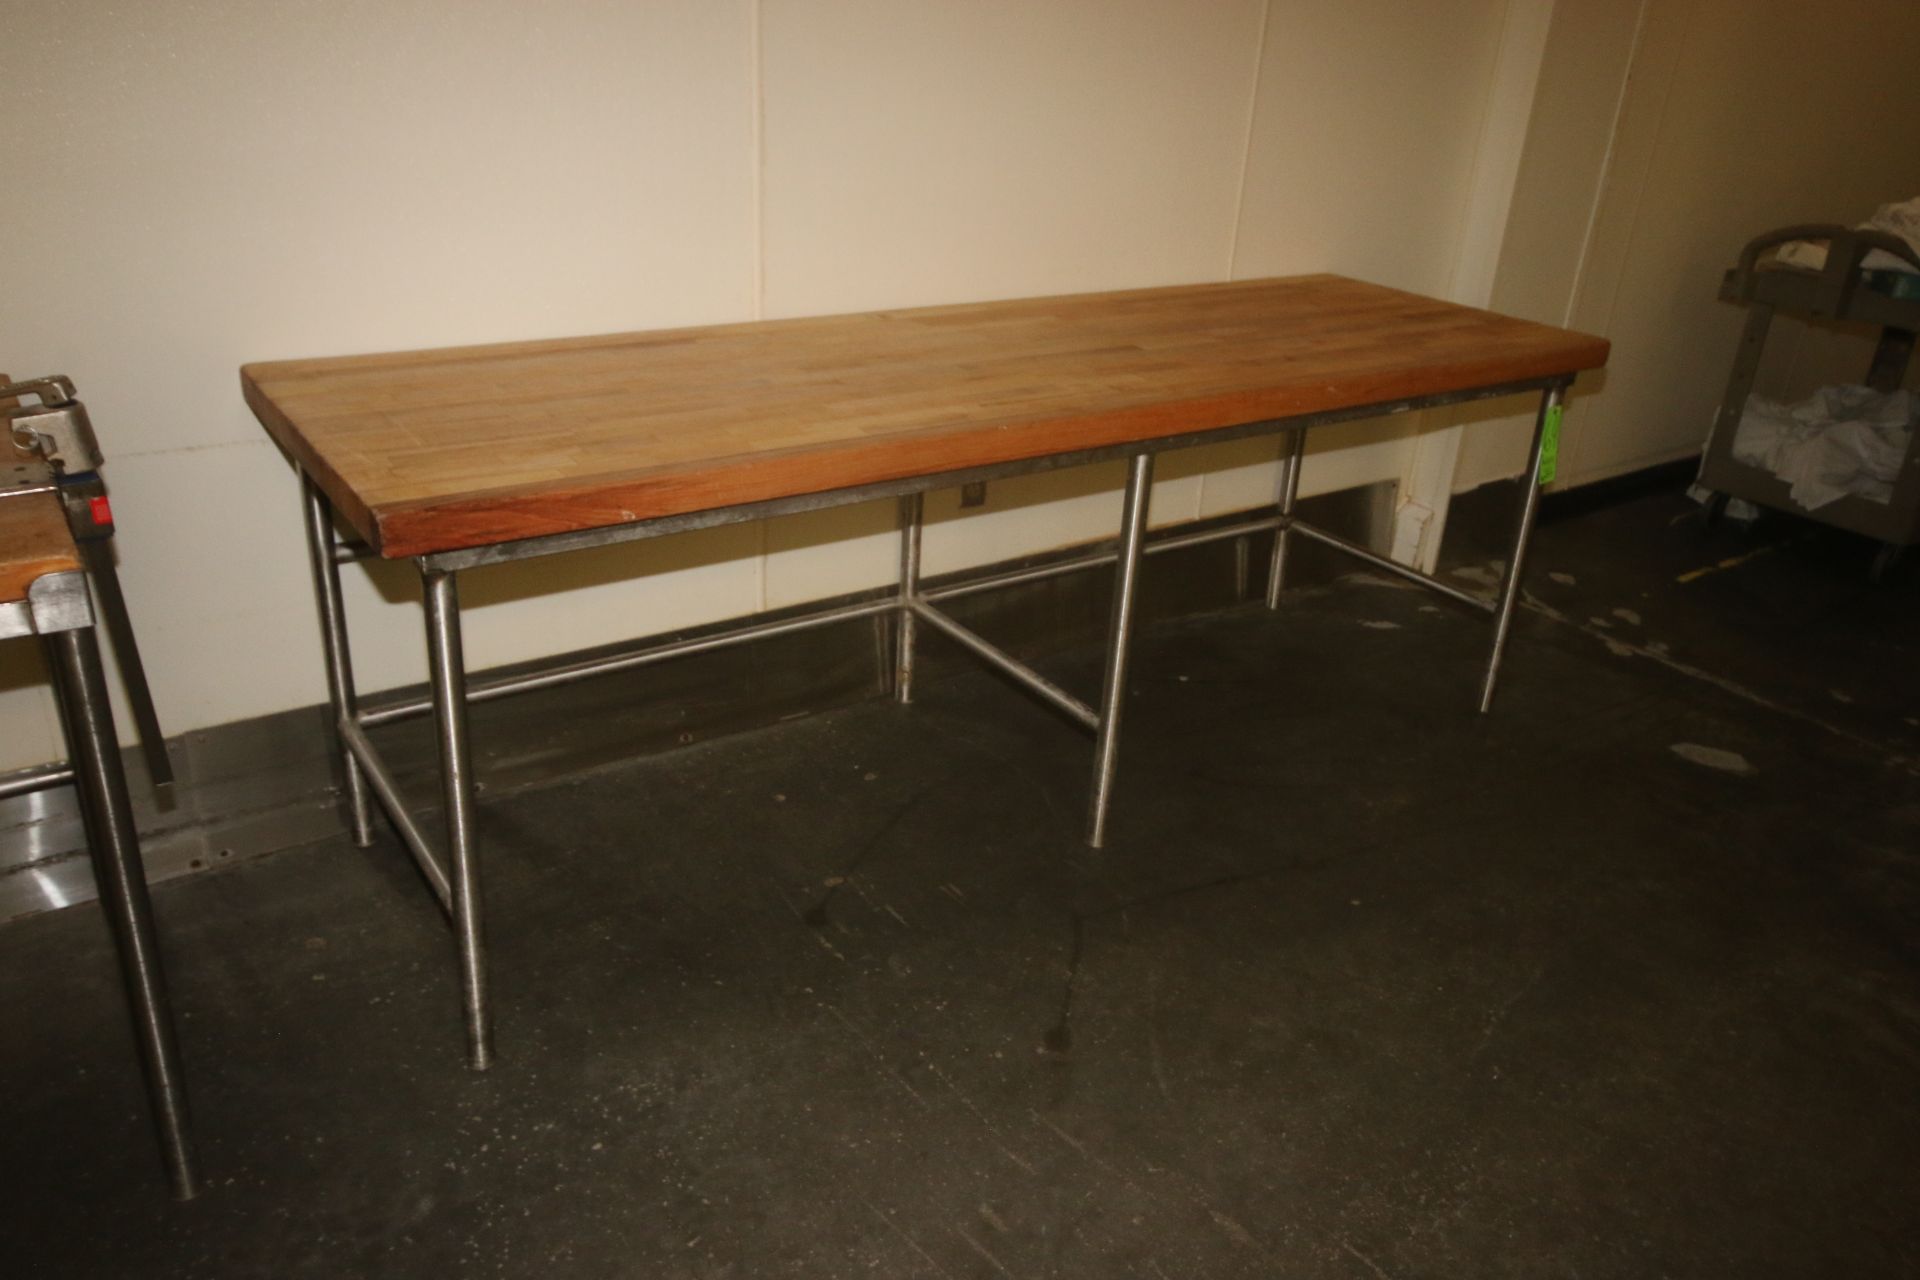 Wooden Top Baking Tables, with S/S Frame & Legs, Overall Dims.: Aprox. 96" L x 36-1/2" W x 34" H - Image 2 of 4